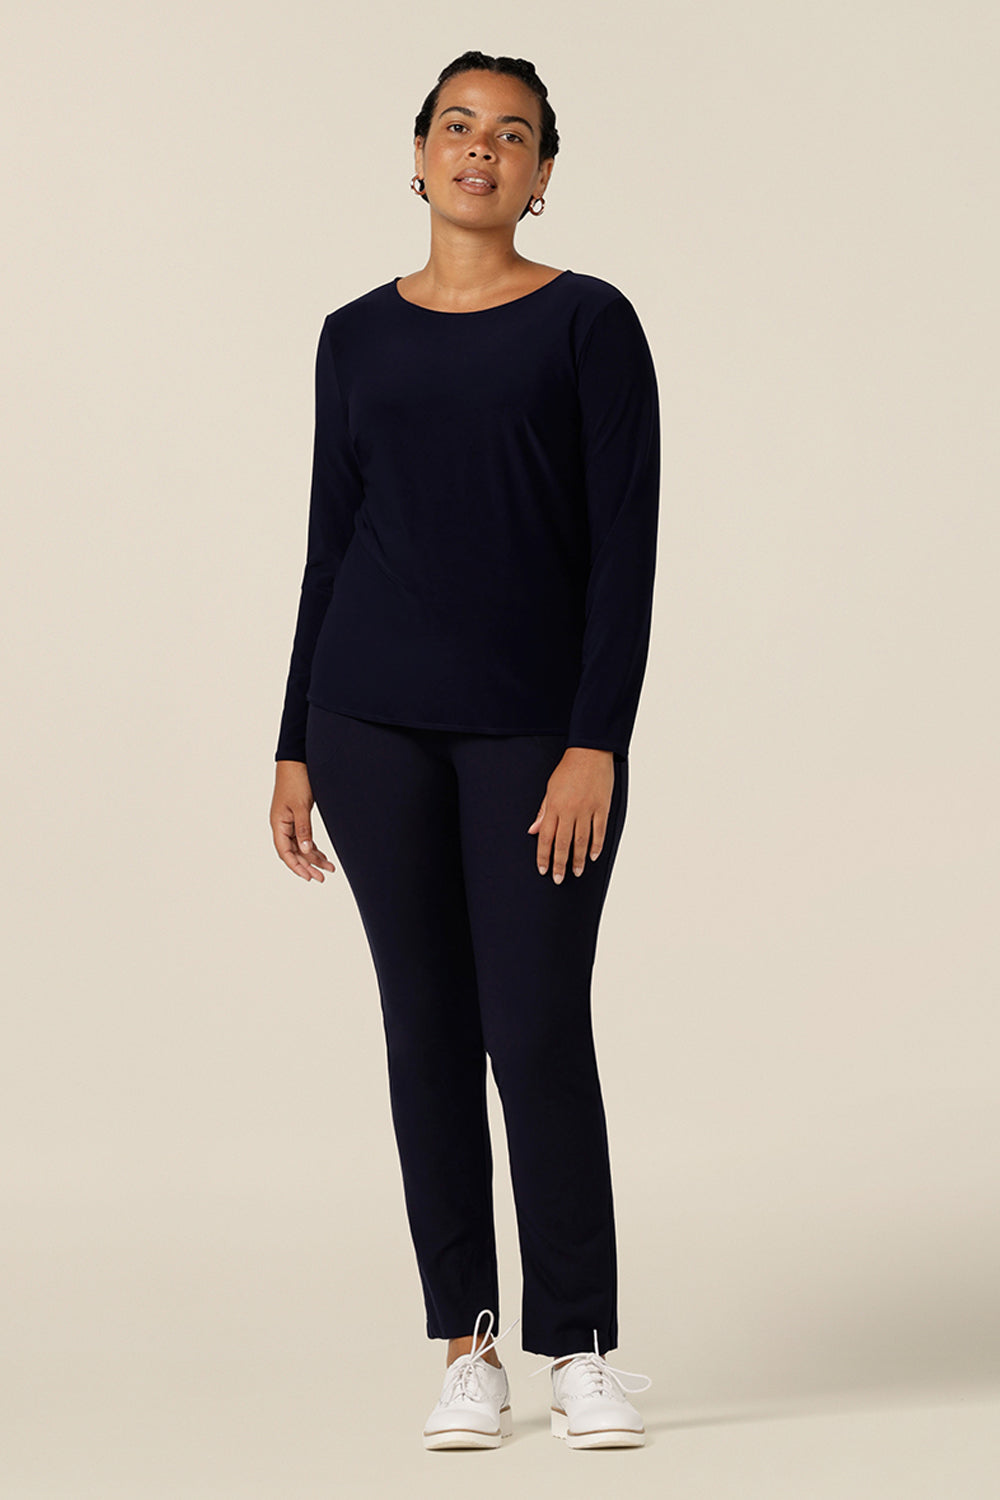 a size 12, curvy woman wears boat neck jersey top in navy blue. A good capsule wardrobe basic, this long sleeve jersey top is worn with slim leg navy blue pants for a casual outfit.